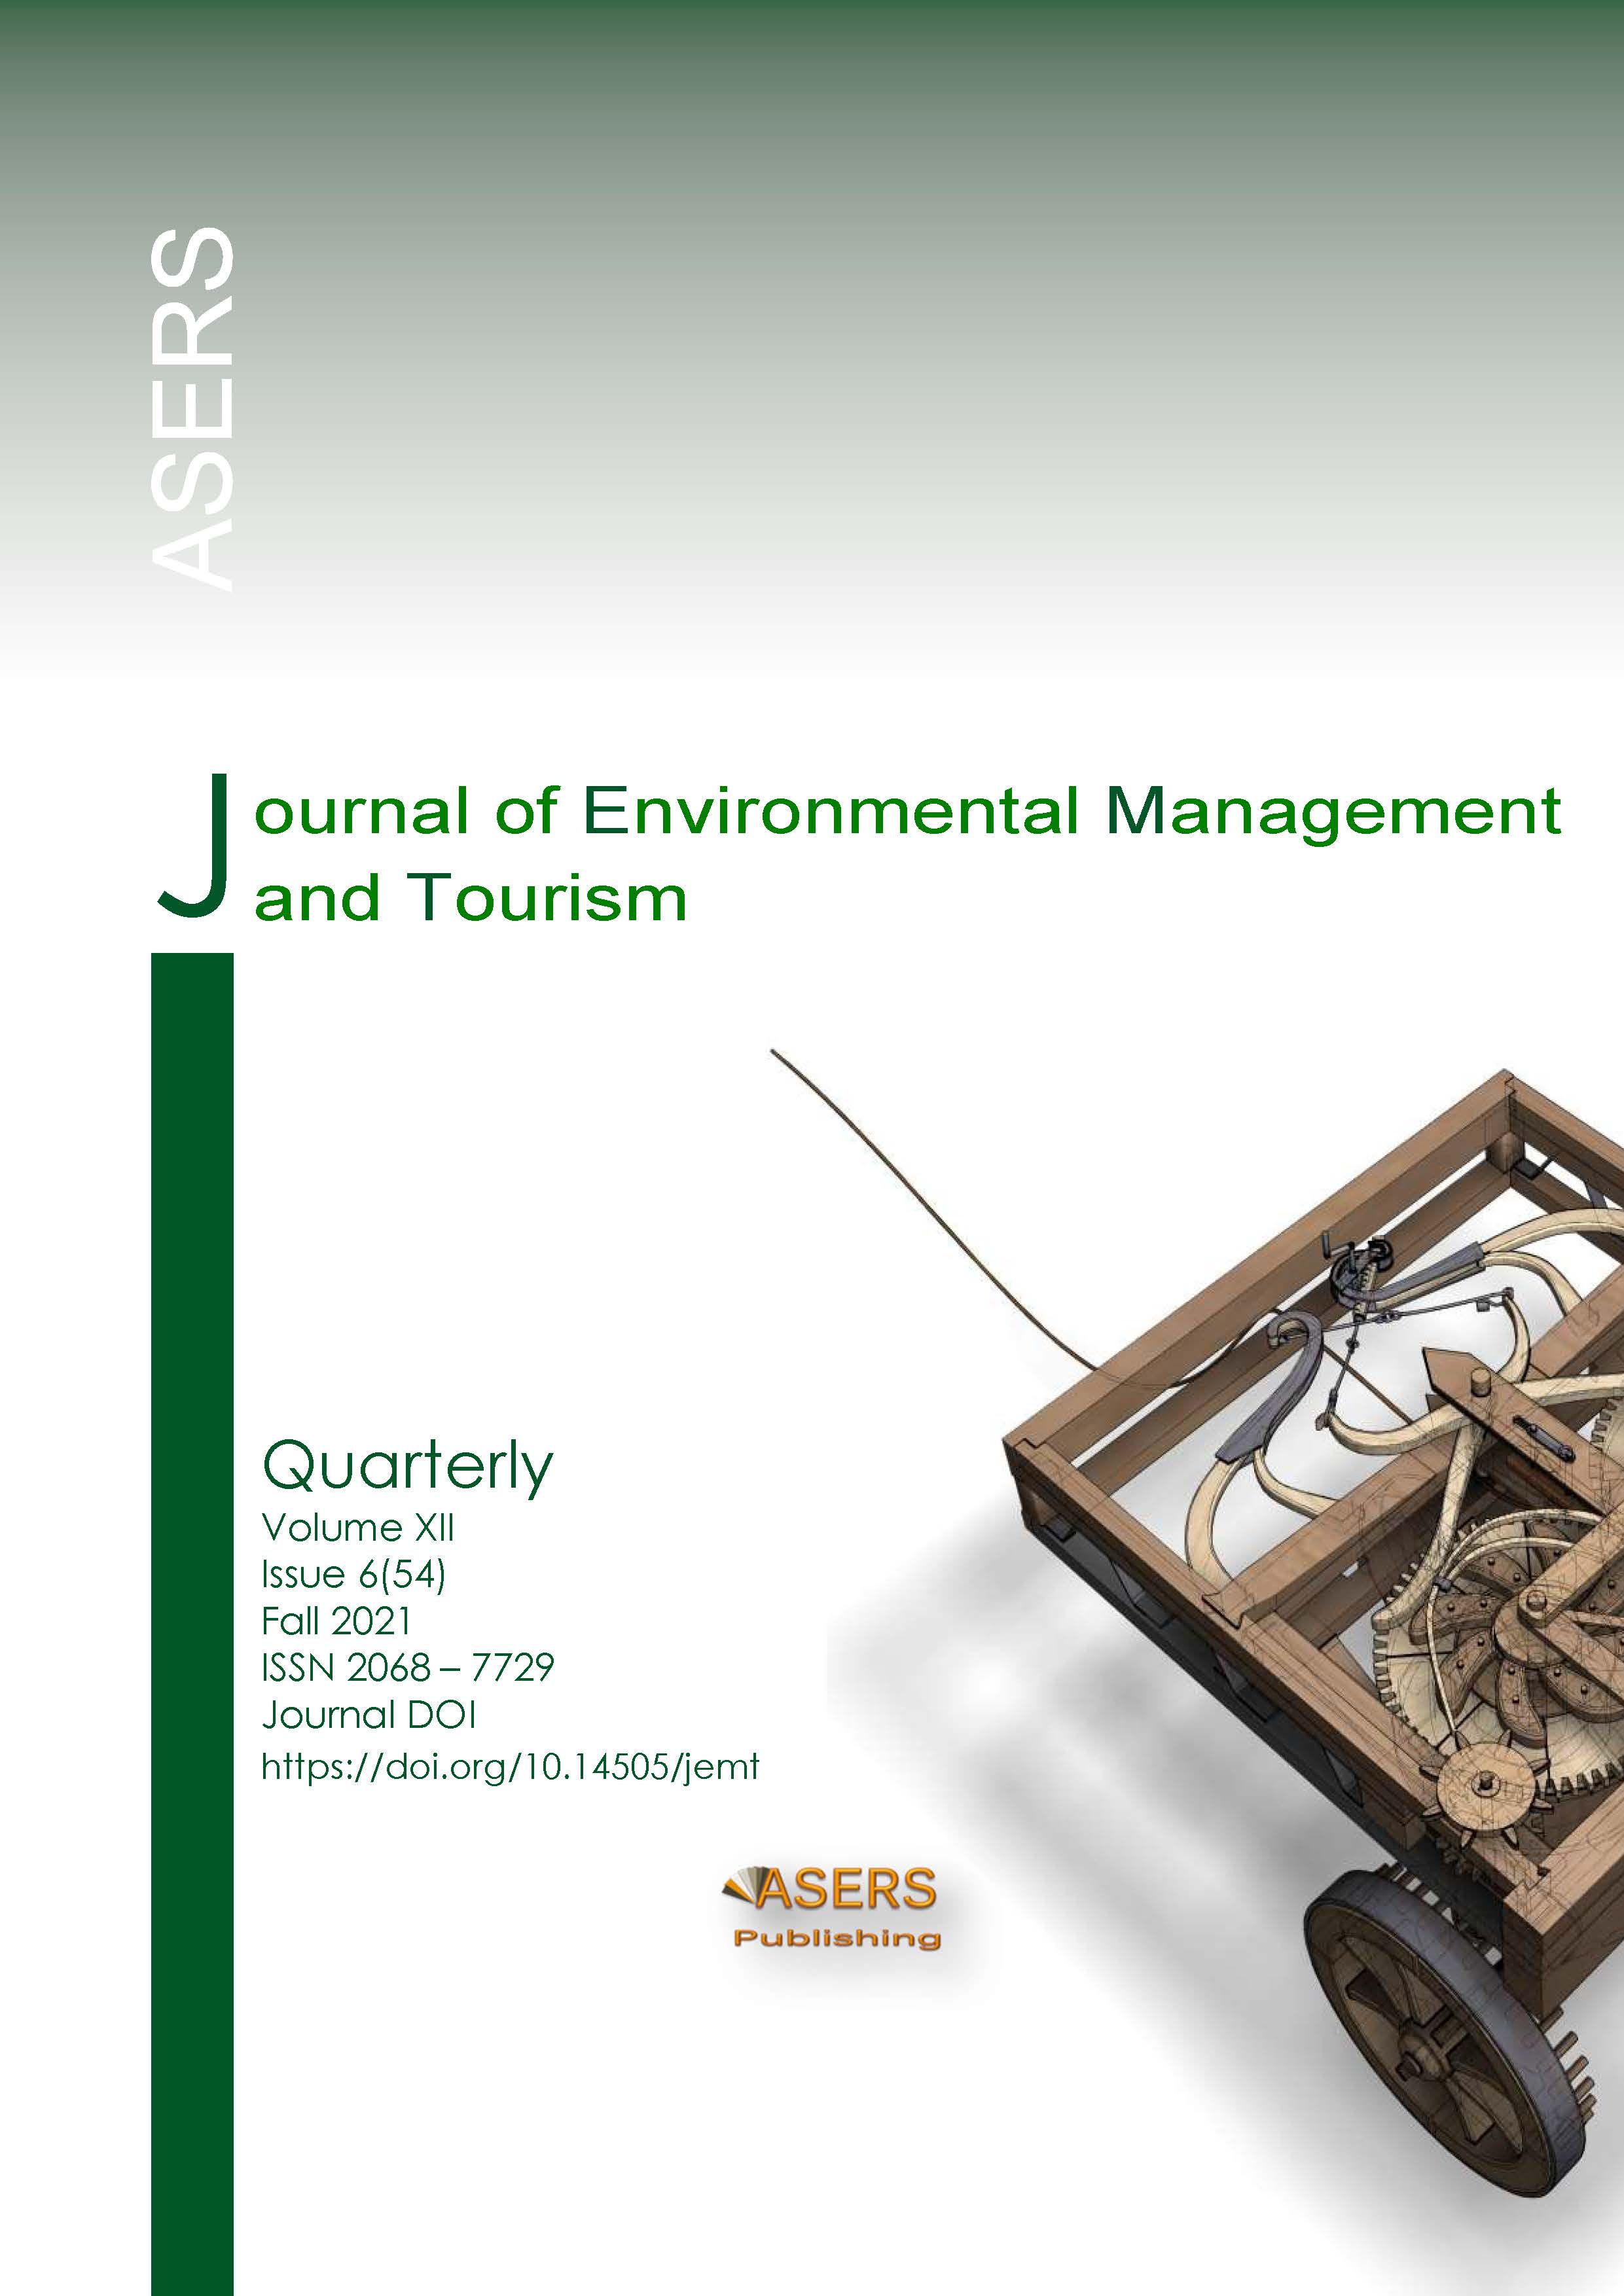 Evaluation of Job Productivity Factors in the Hospitality Industry